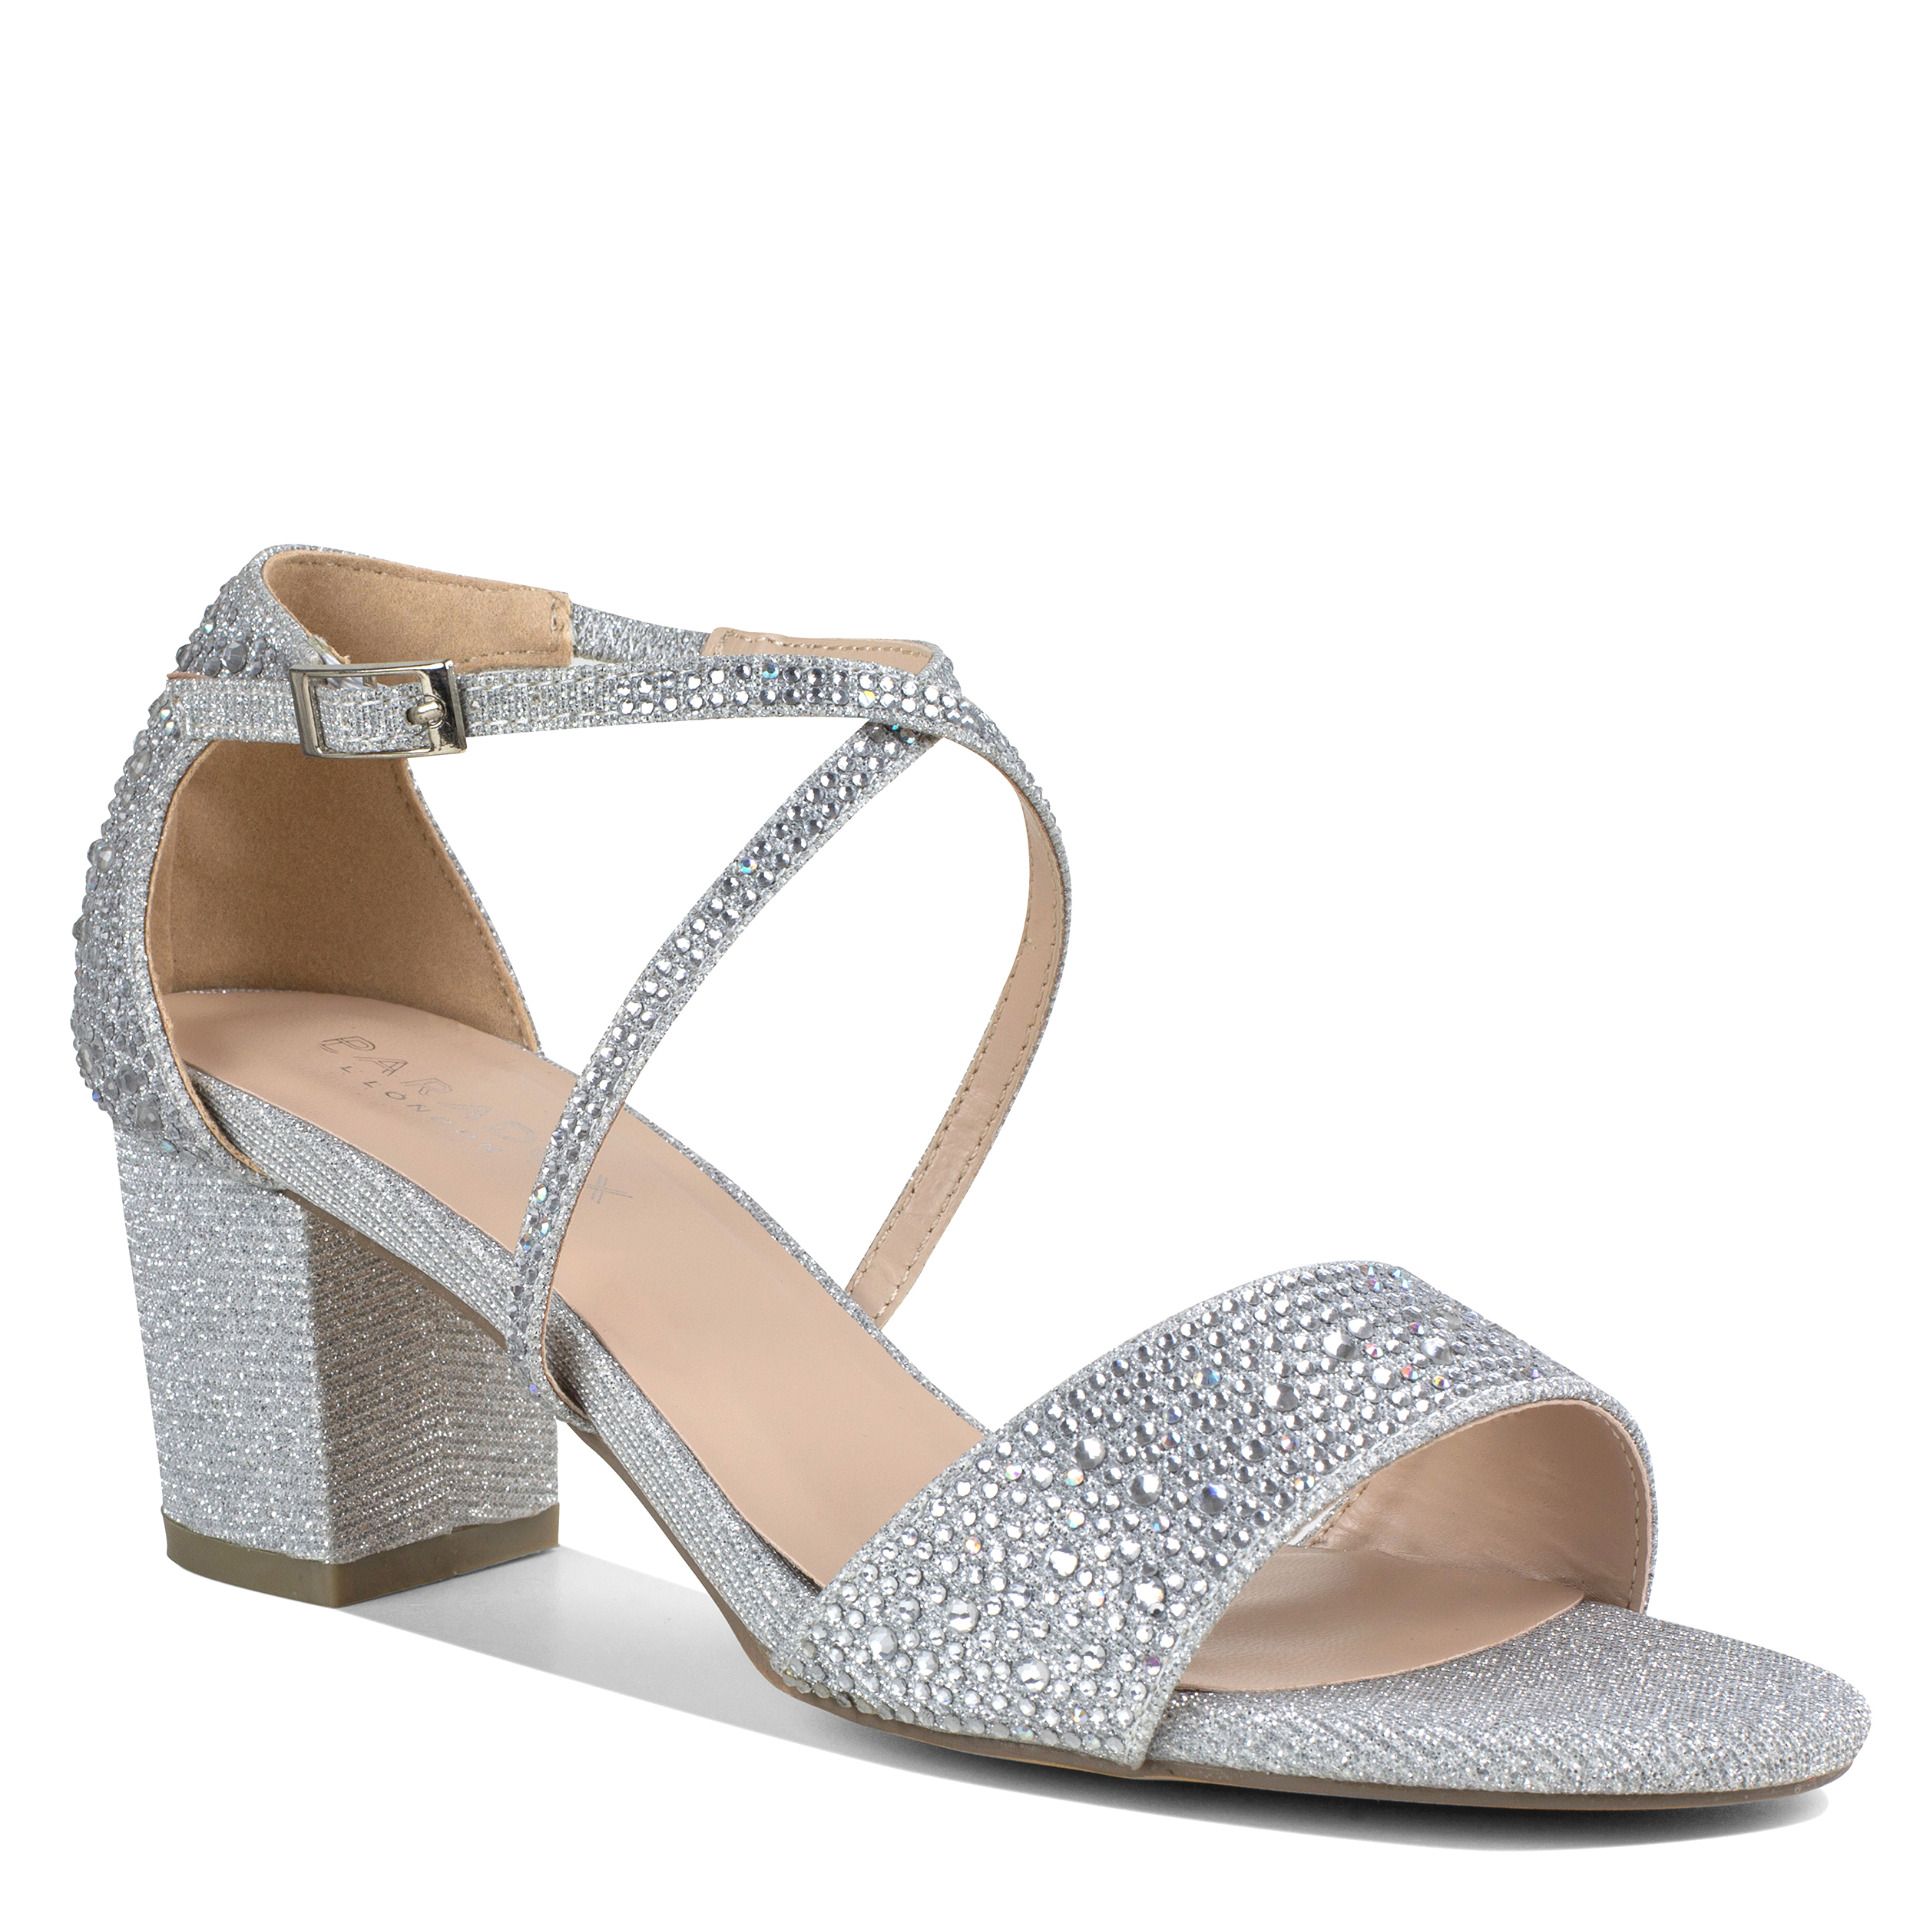 Metallic silver shoe with 2" block heel and criss cross straps